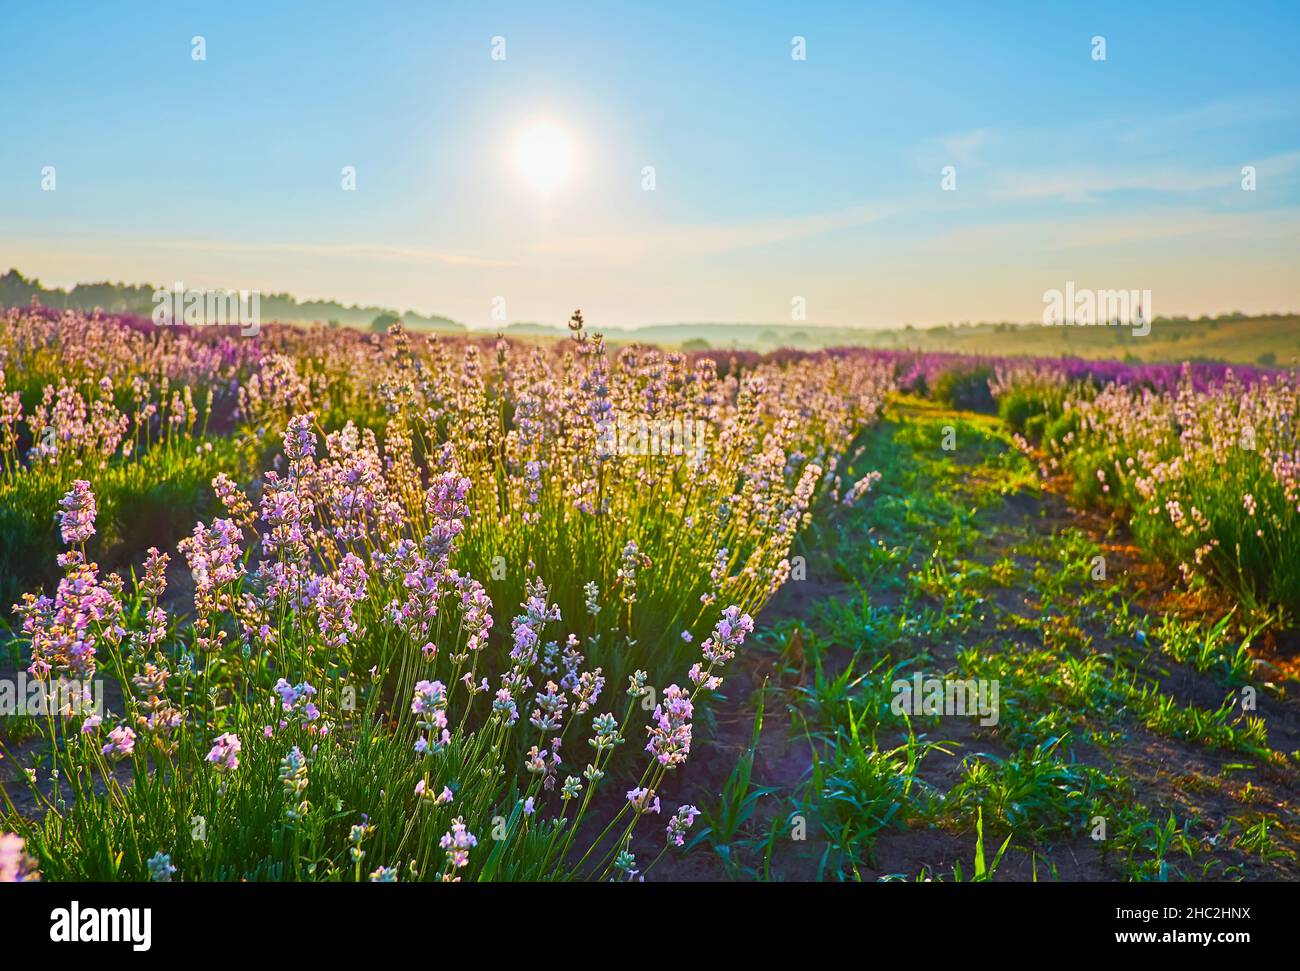 The low angle view of Nana Alba white lavender plants in the field Stock Photo